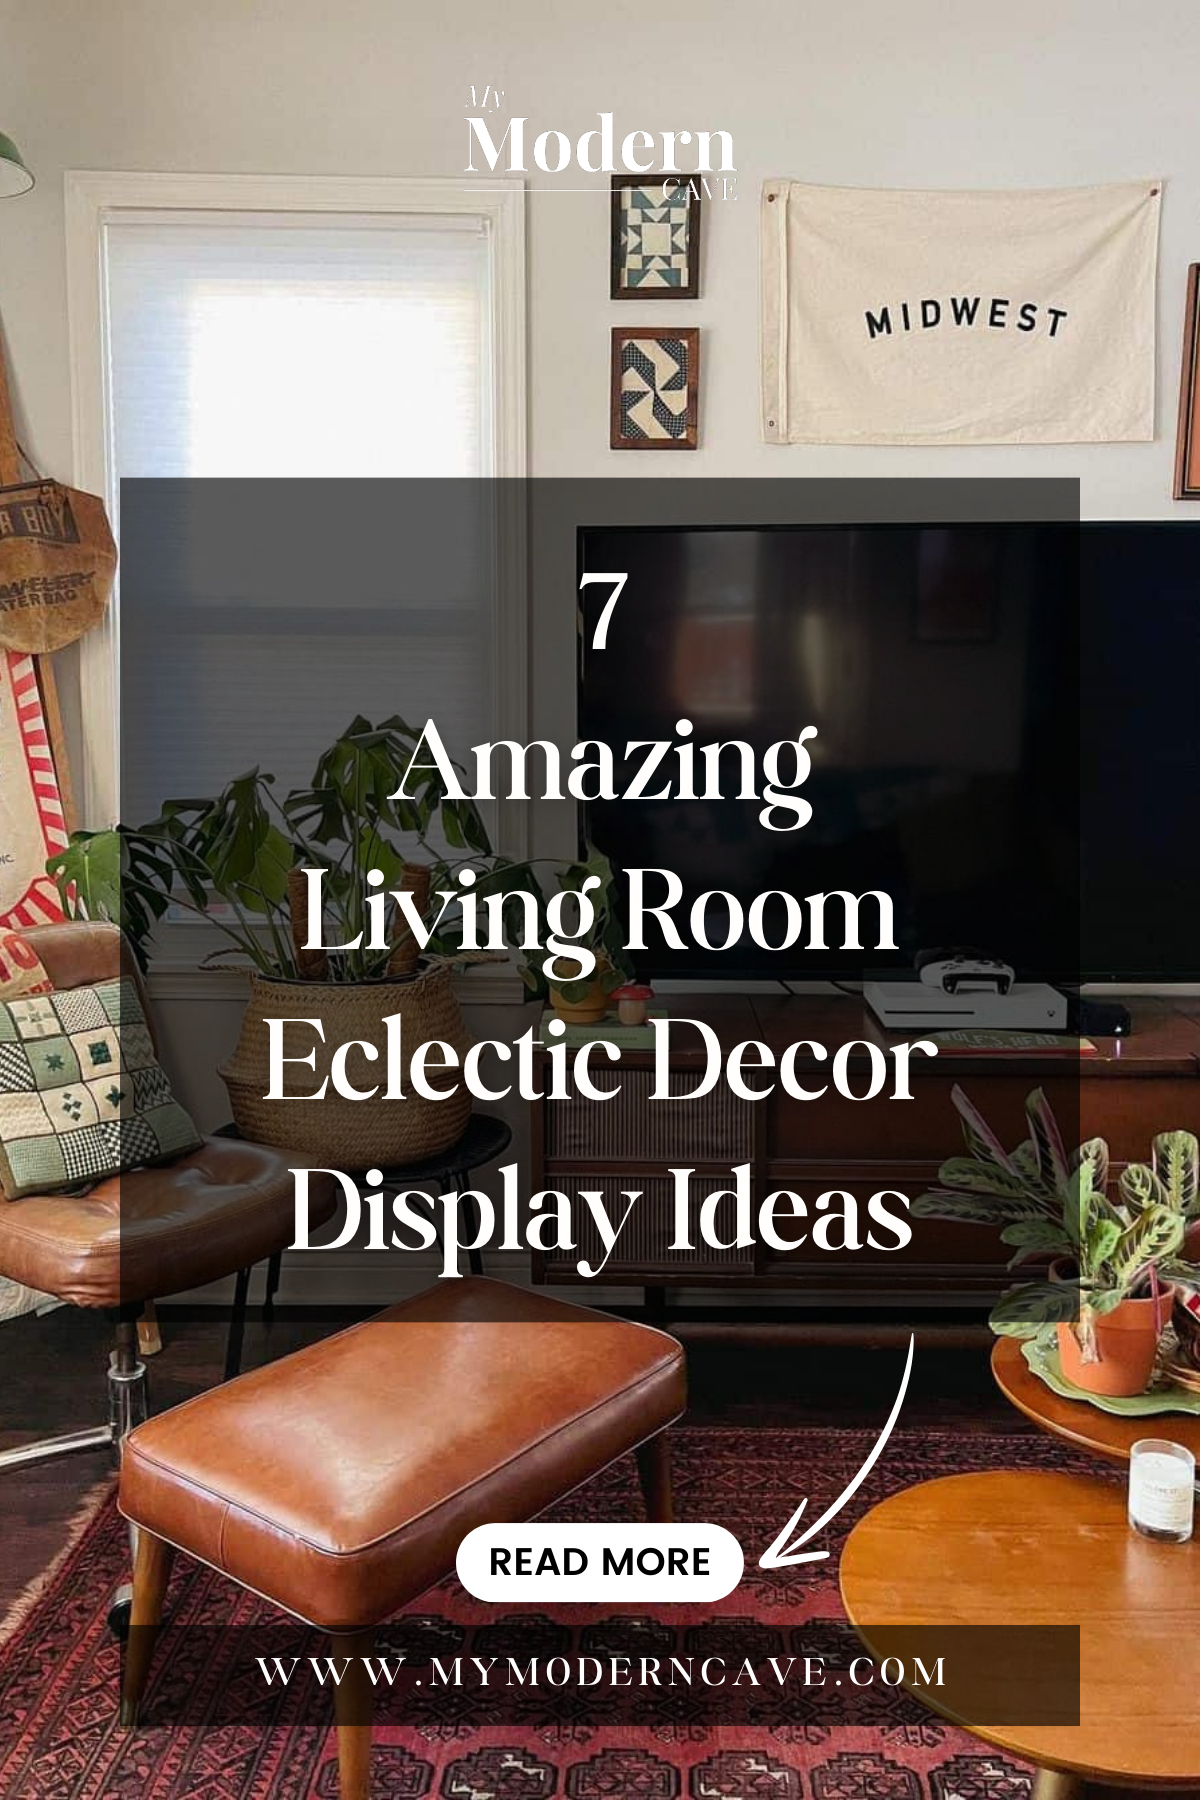 Living Room Eclectic Decor Display Ideas Infographic